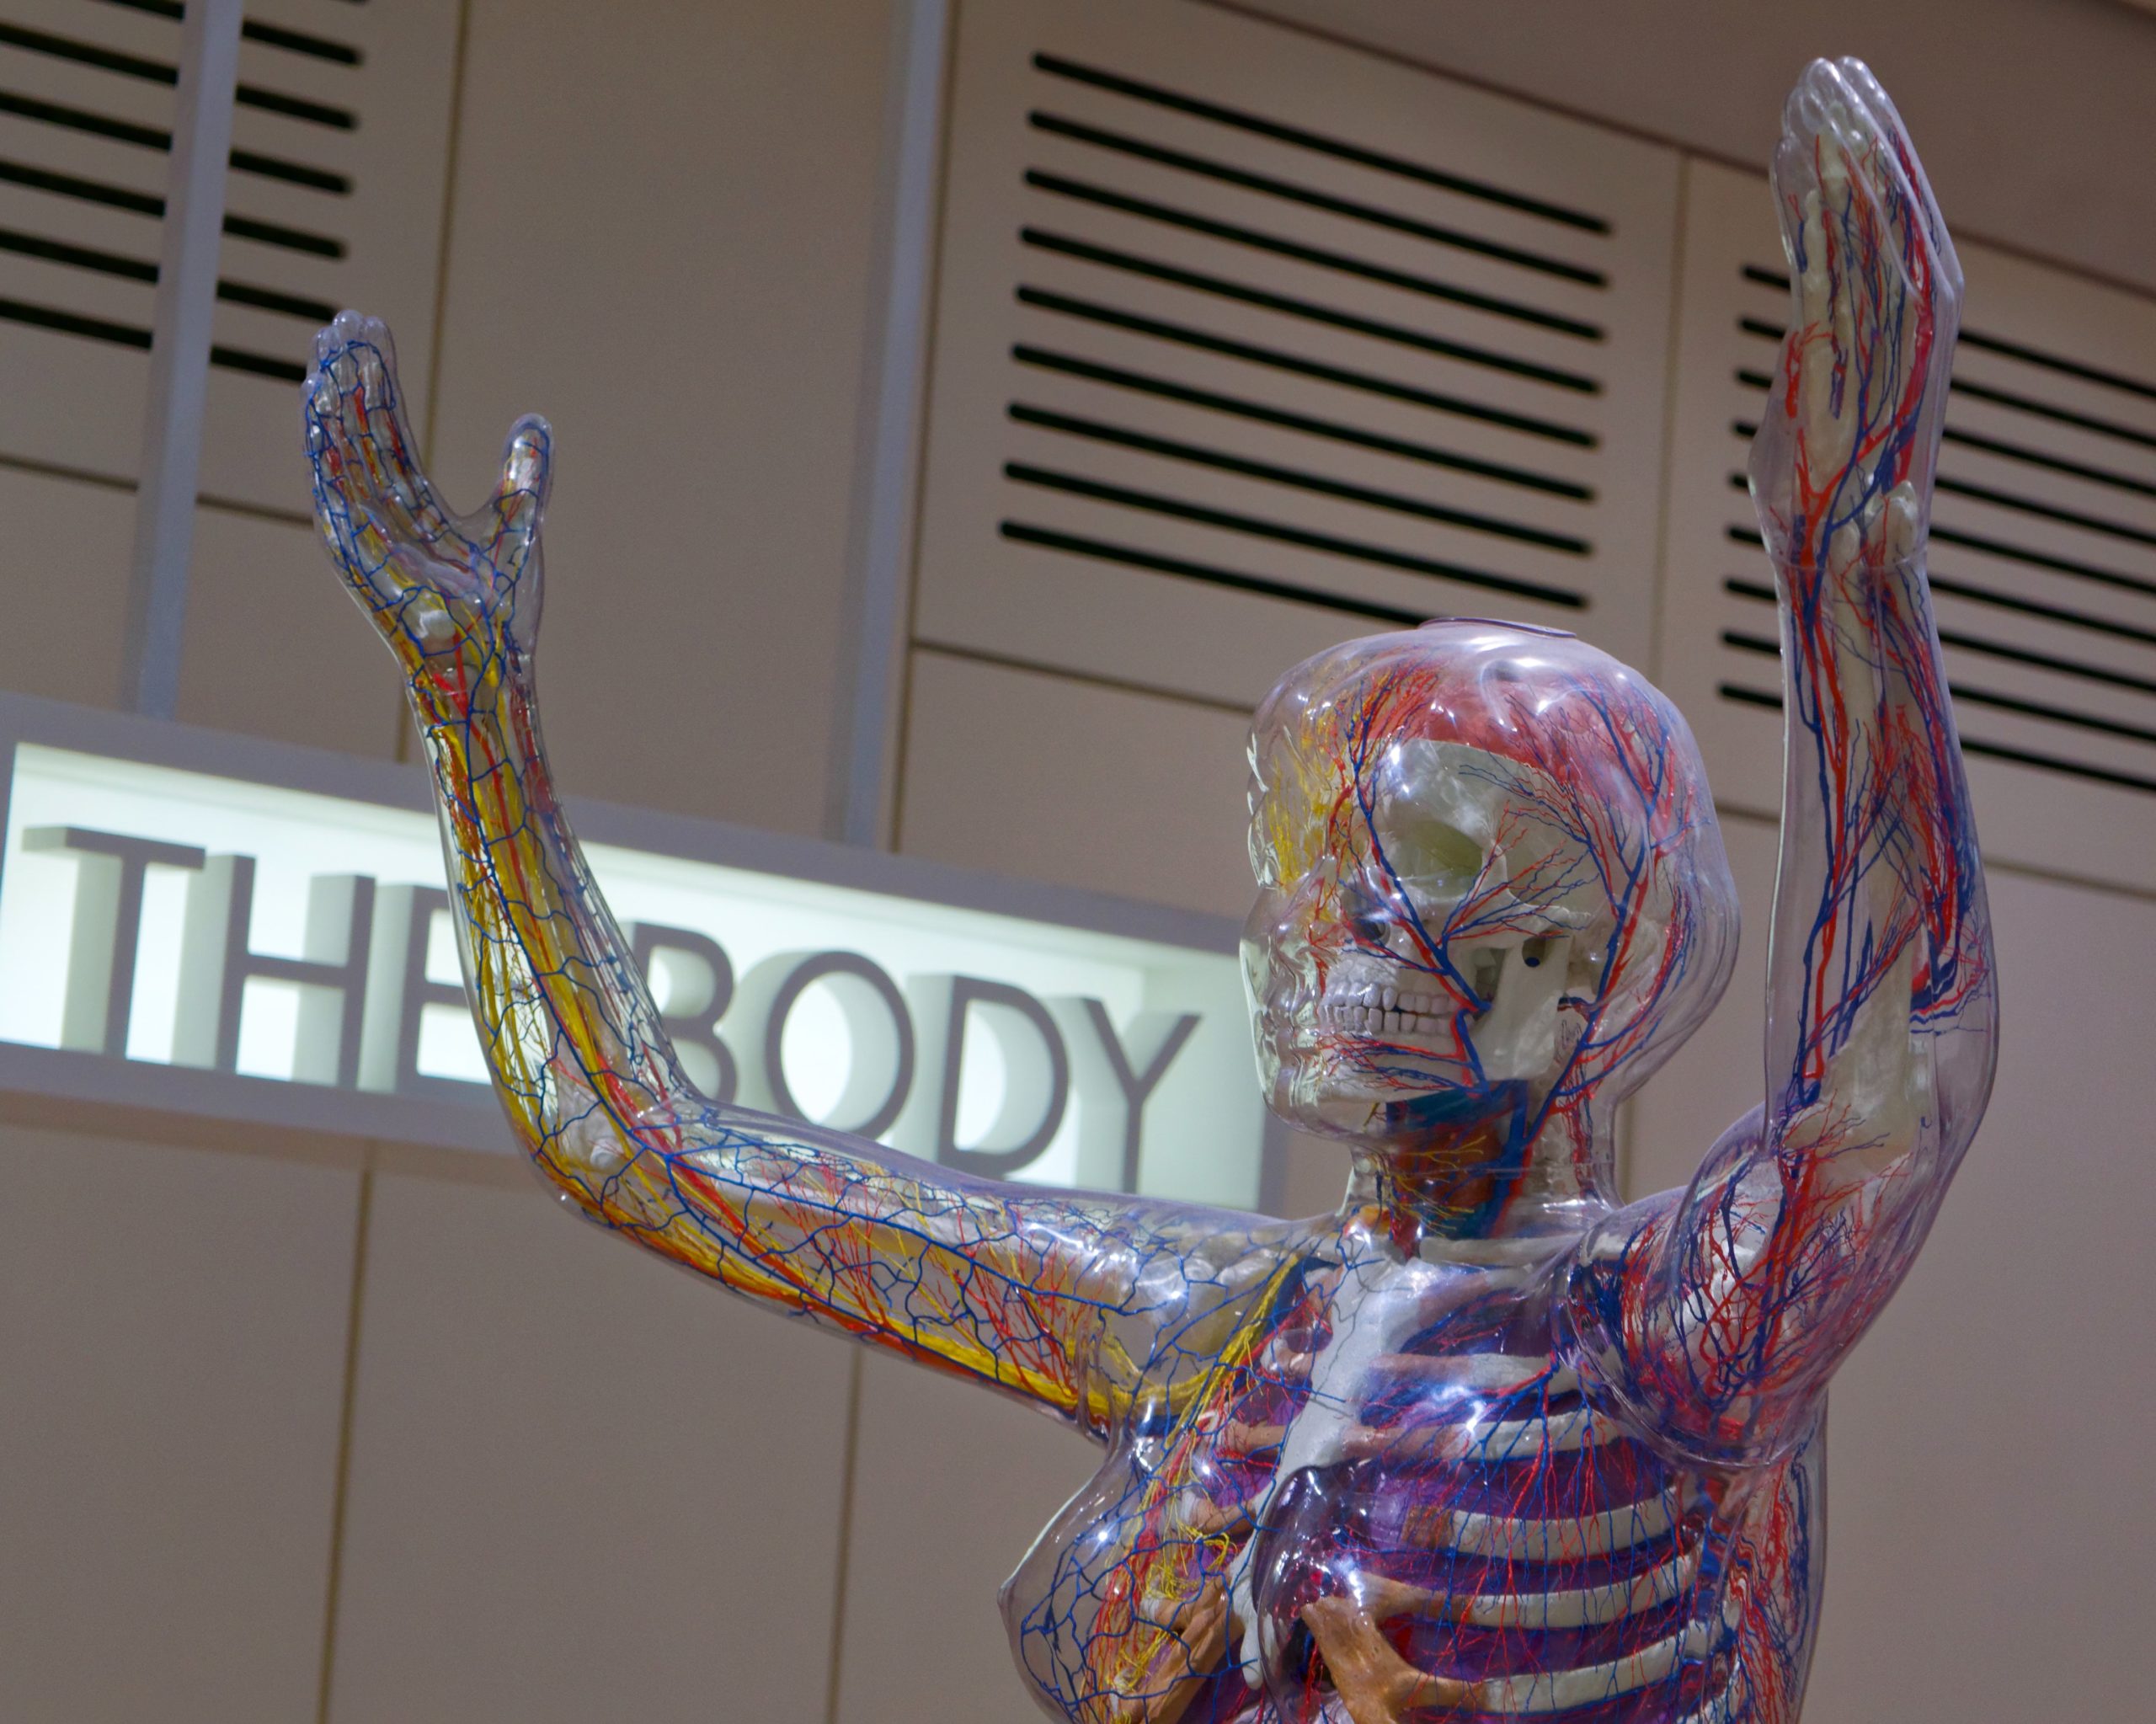 Clear plastic body model showing veins and muscles with text that reads "The Body"